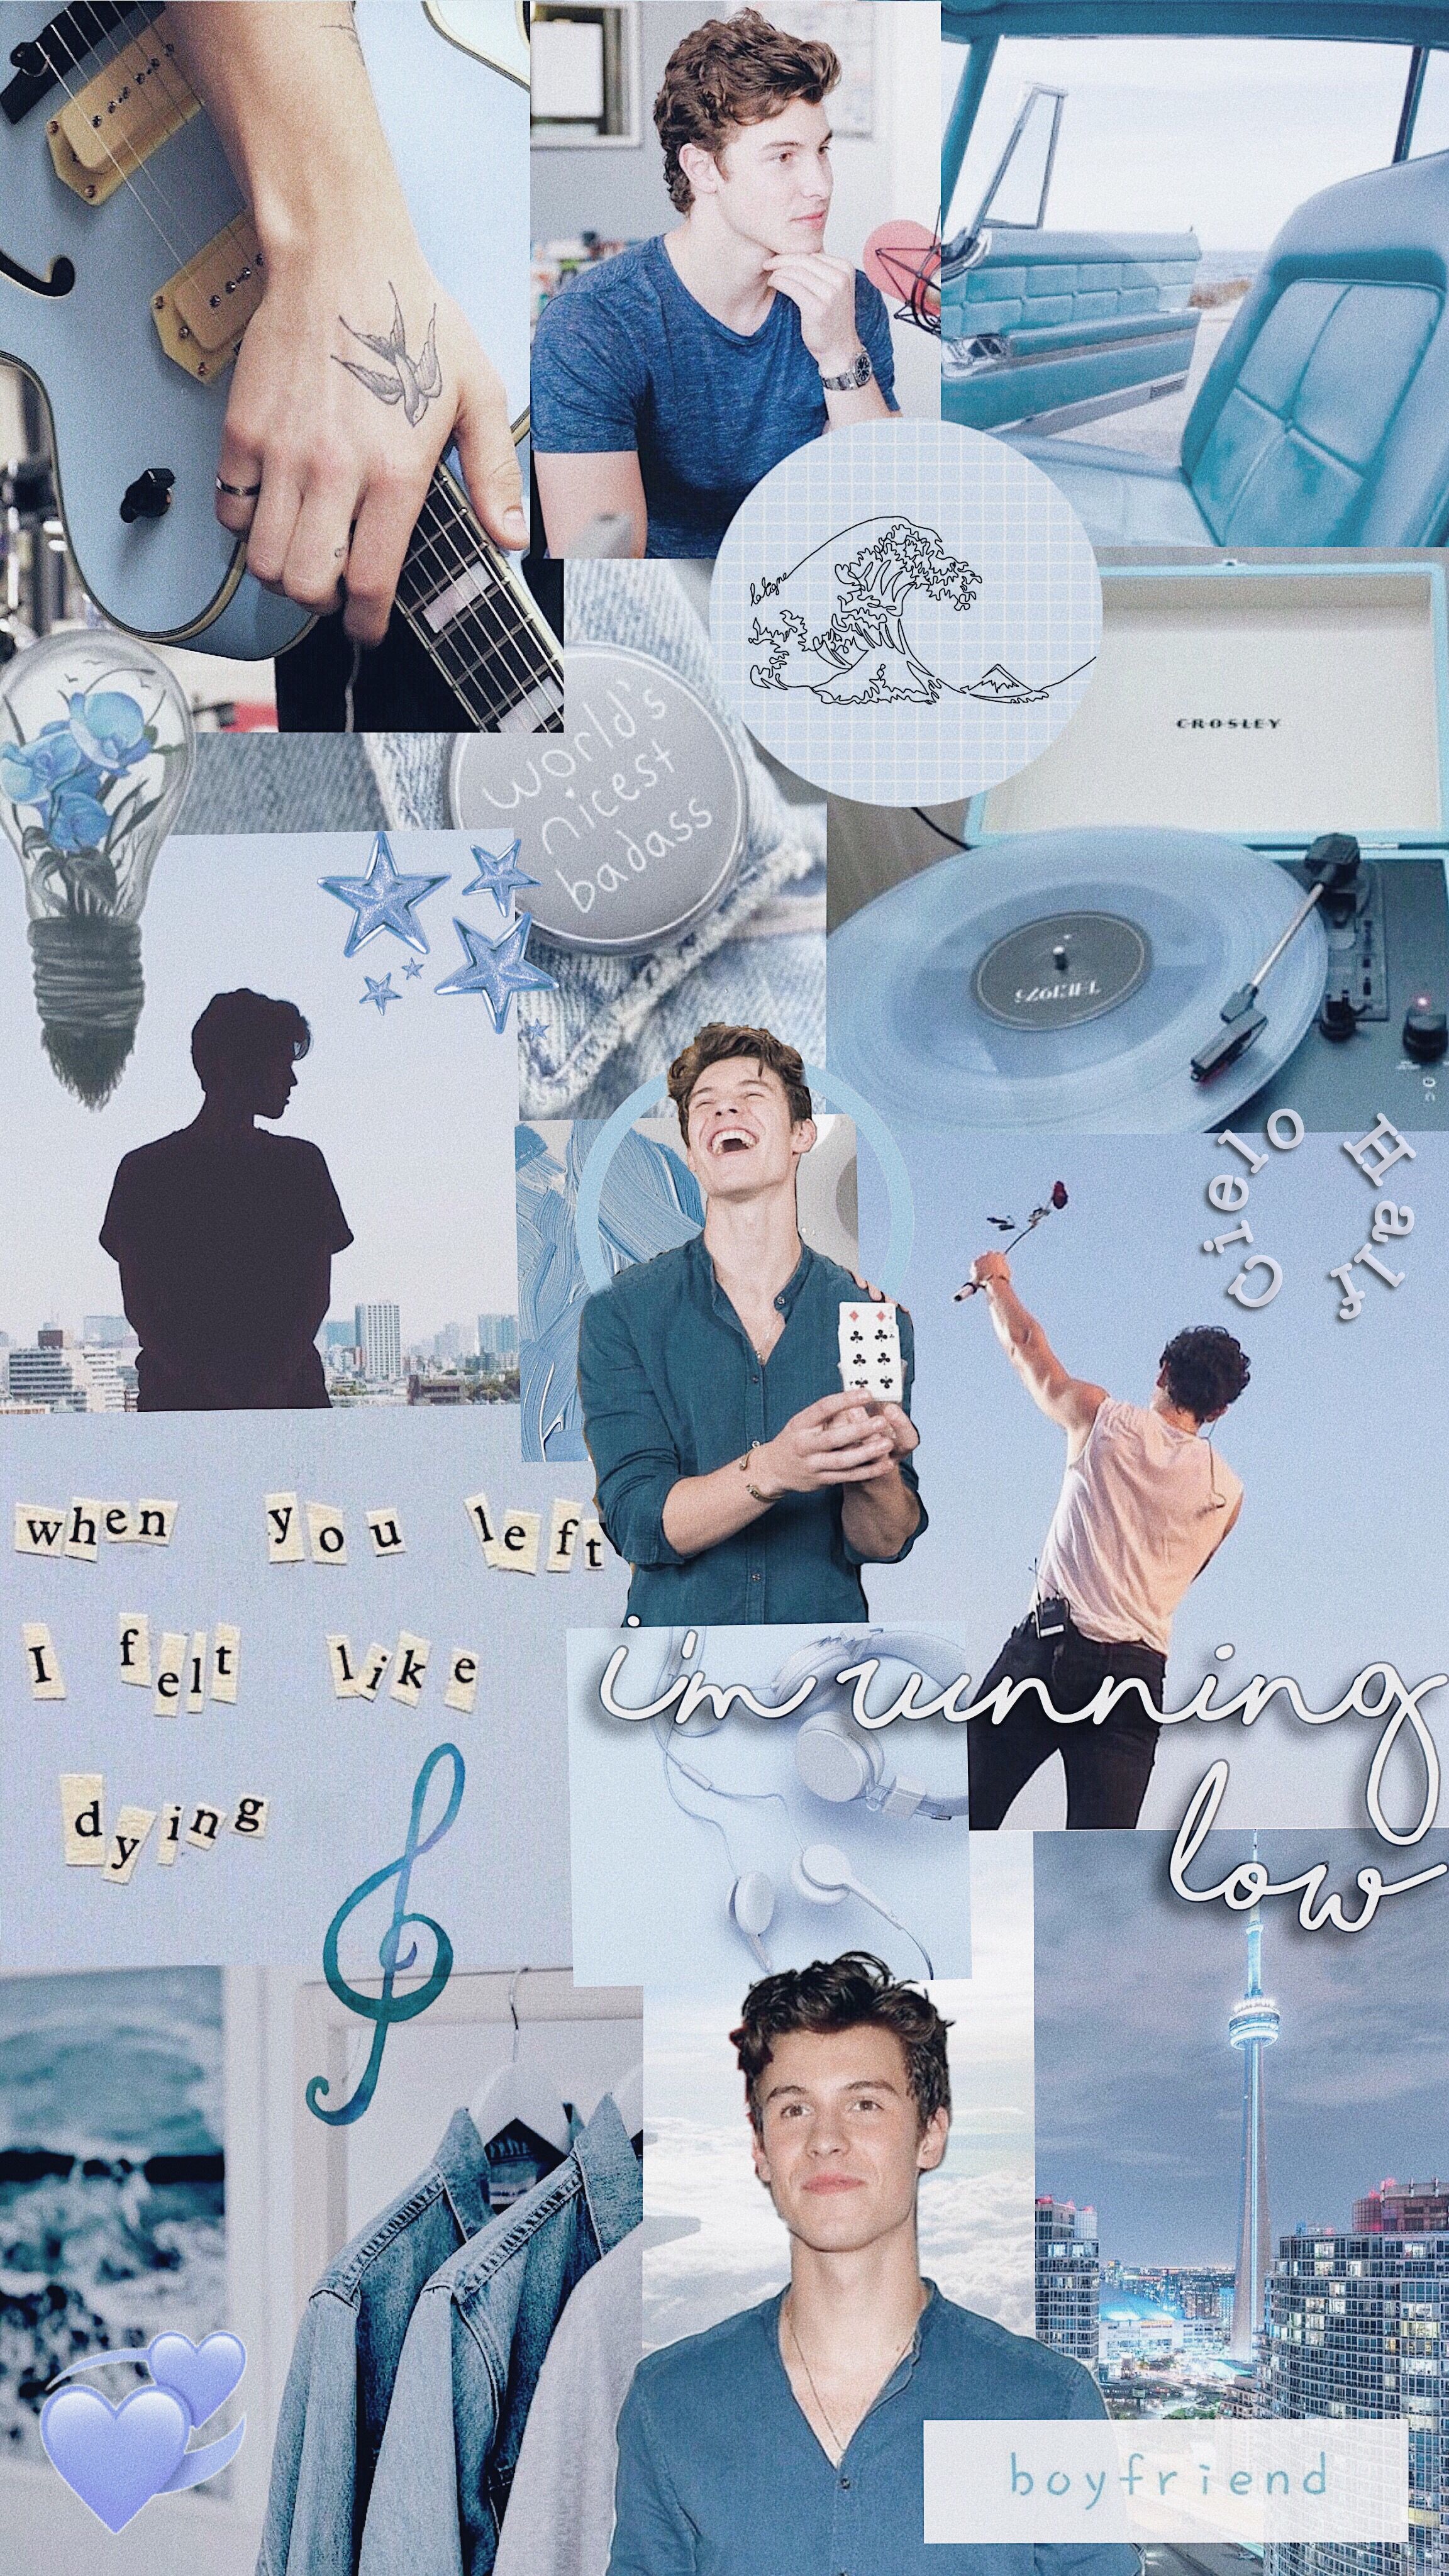 Shawn Mendes aesthetic wallpaper blue. Shawn mendes wallpaper, Shawn, Shawn mendes